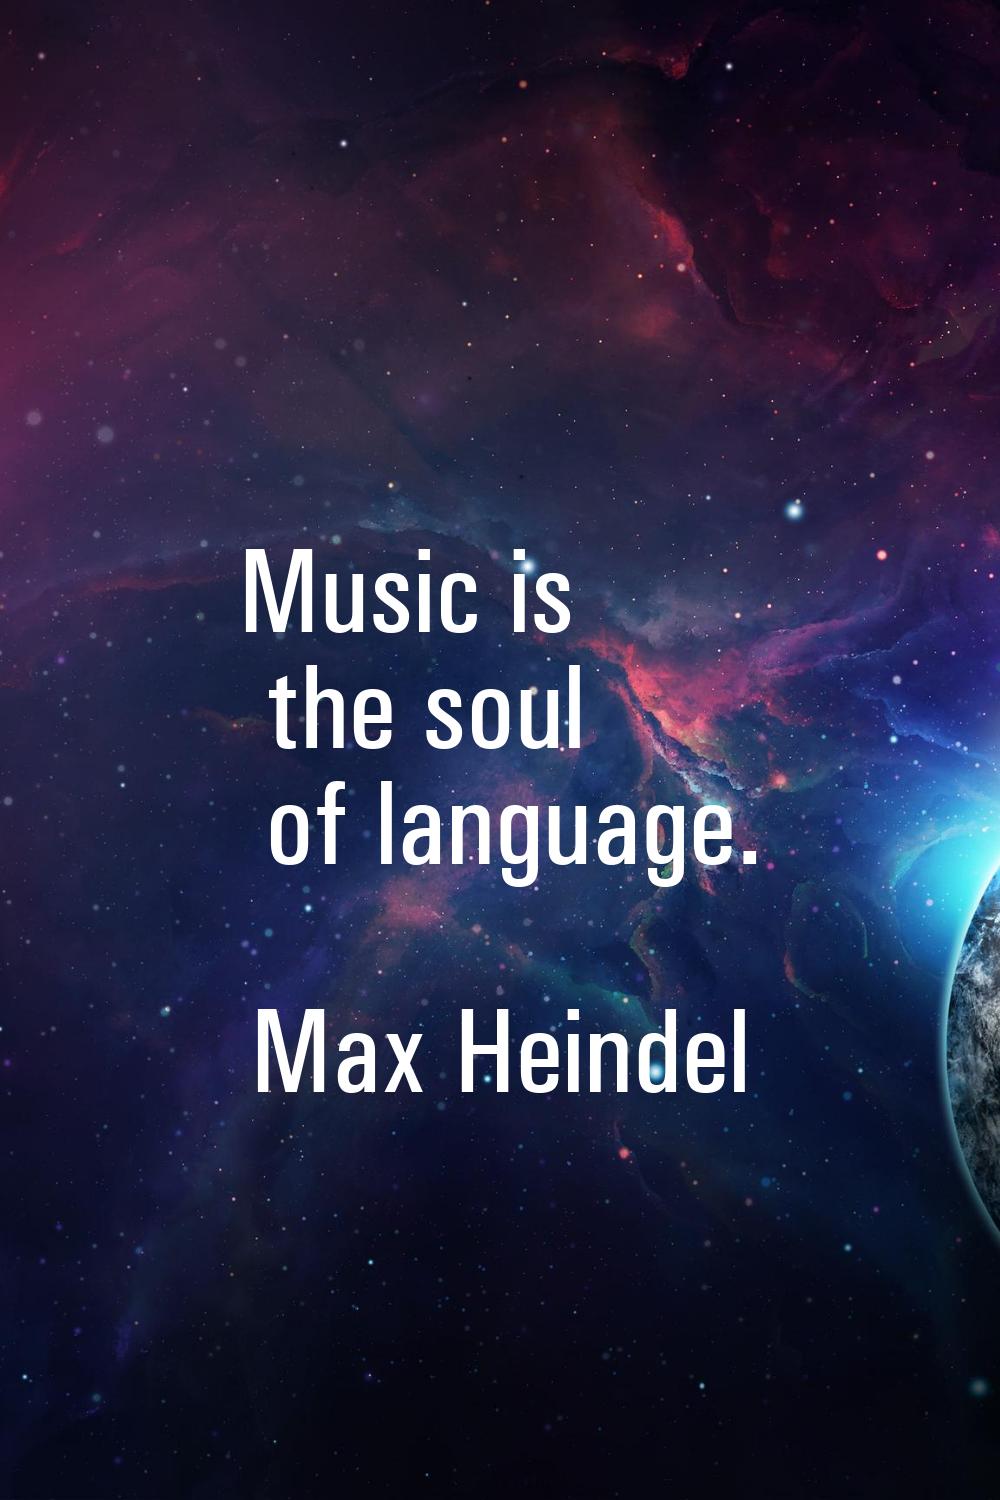 Music is the soul of language.